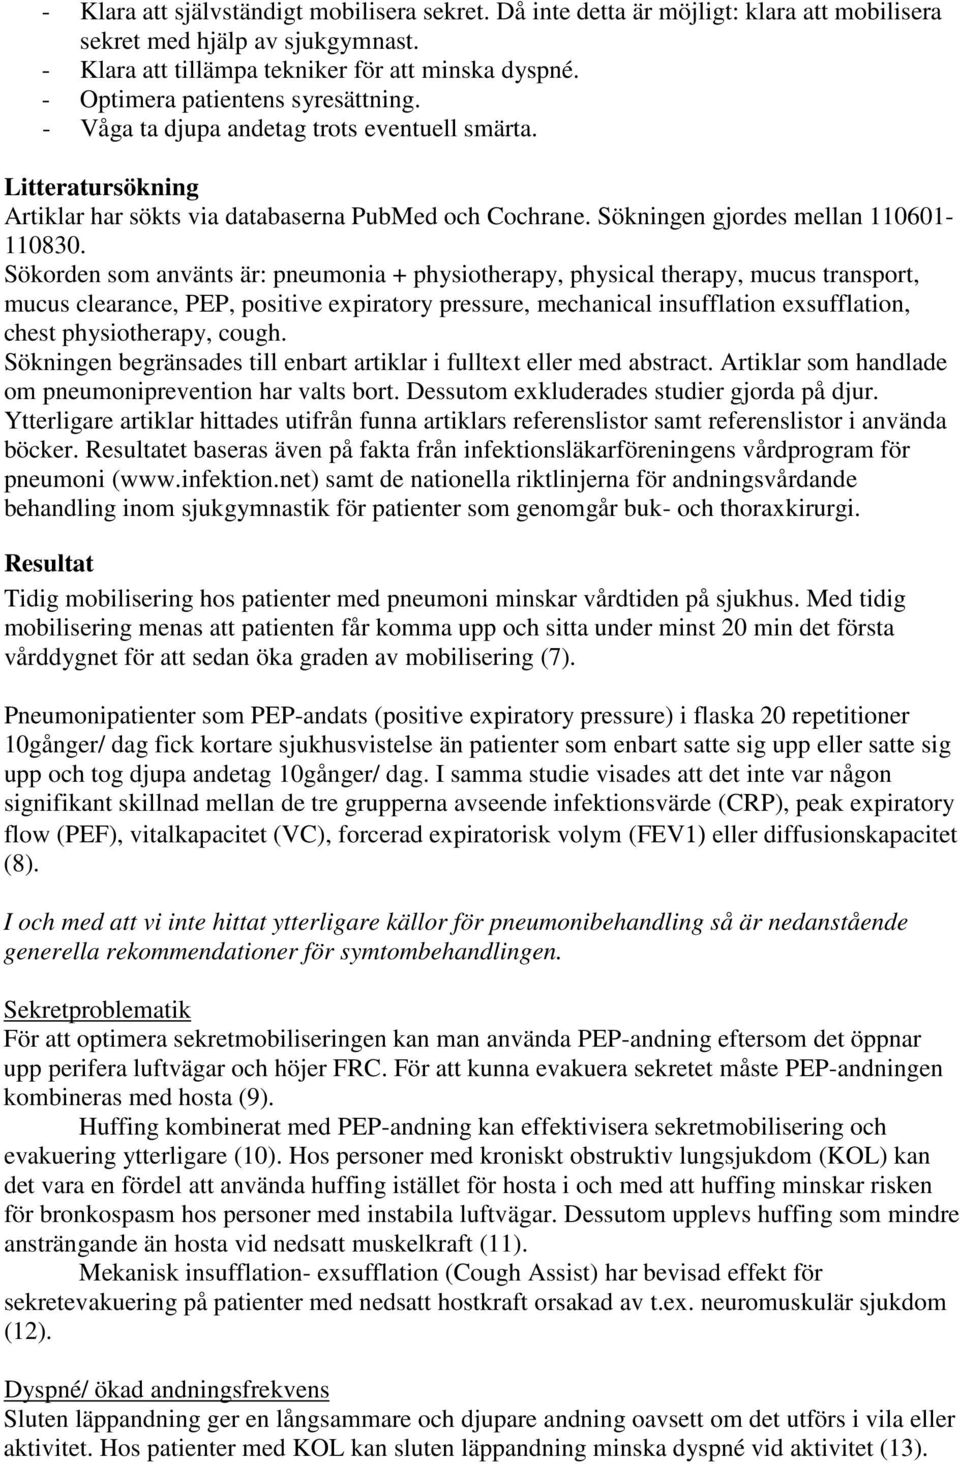 Sökorden som använts är: pneumonia + physiotherapy, physical therapy, mucus transport, mucus clearance, PEP, positive expiratory pressure, mechanical insufflation exsufflation, chest physiotherapy,